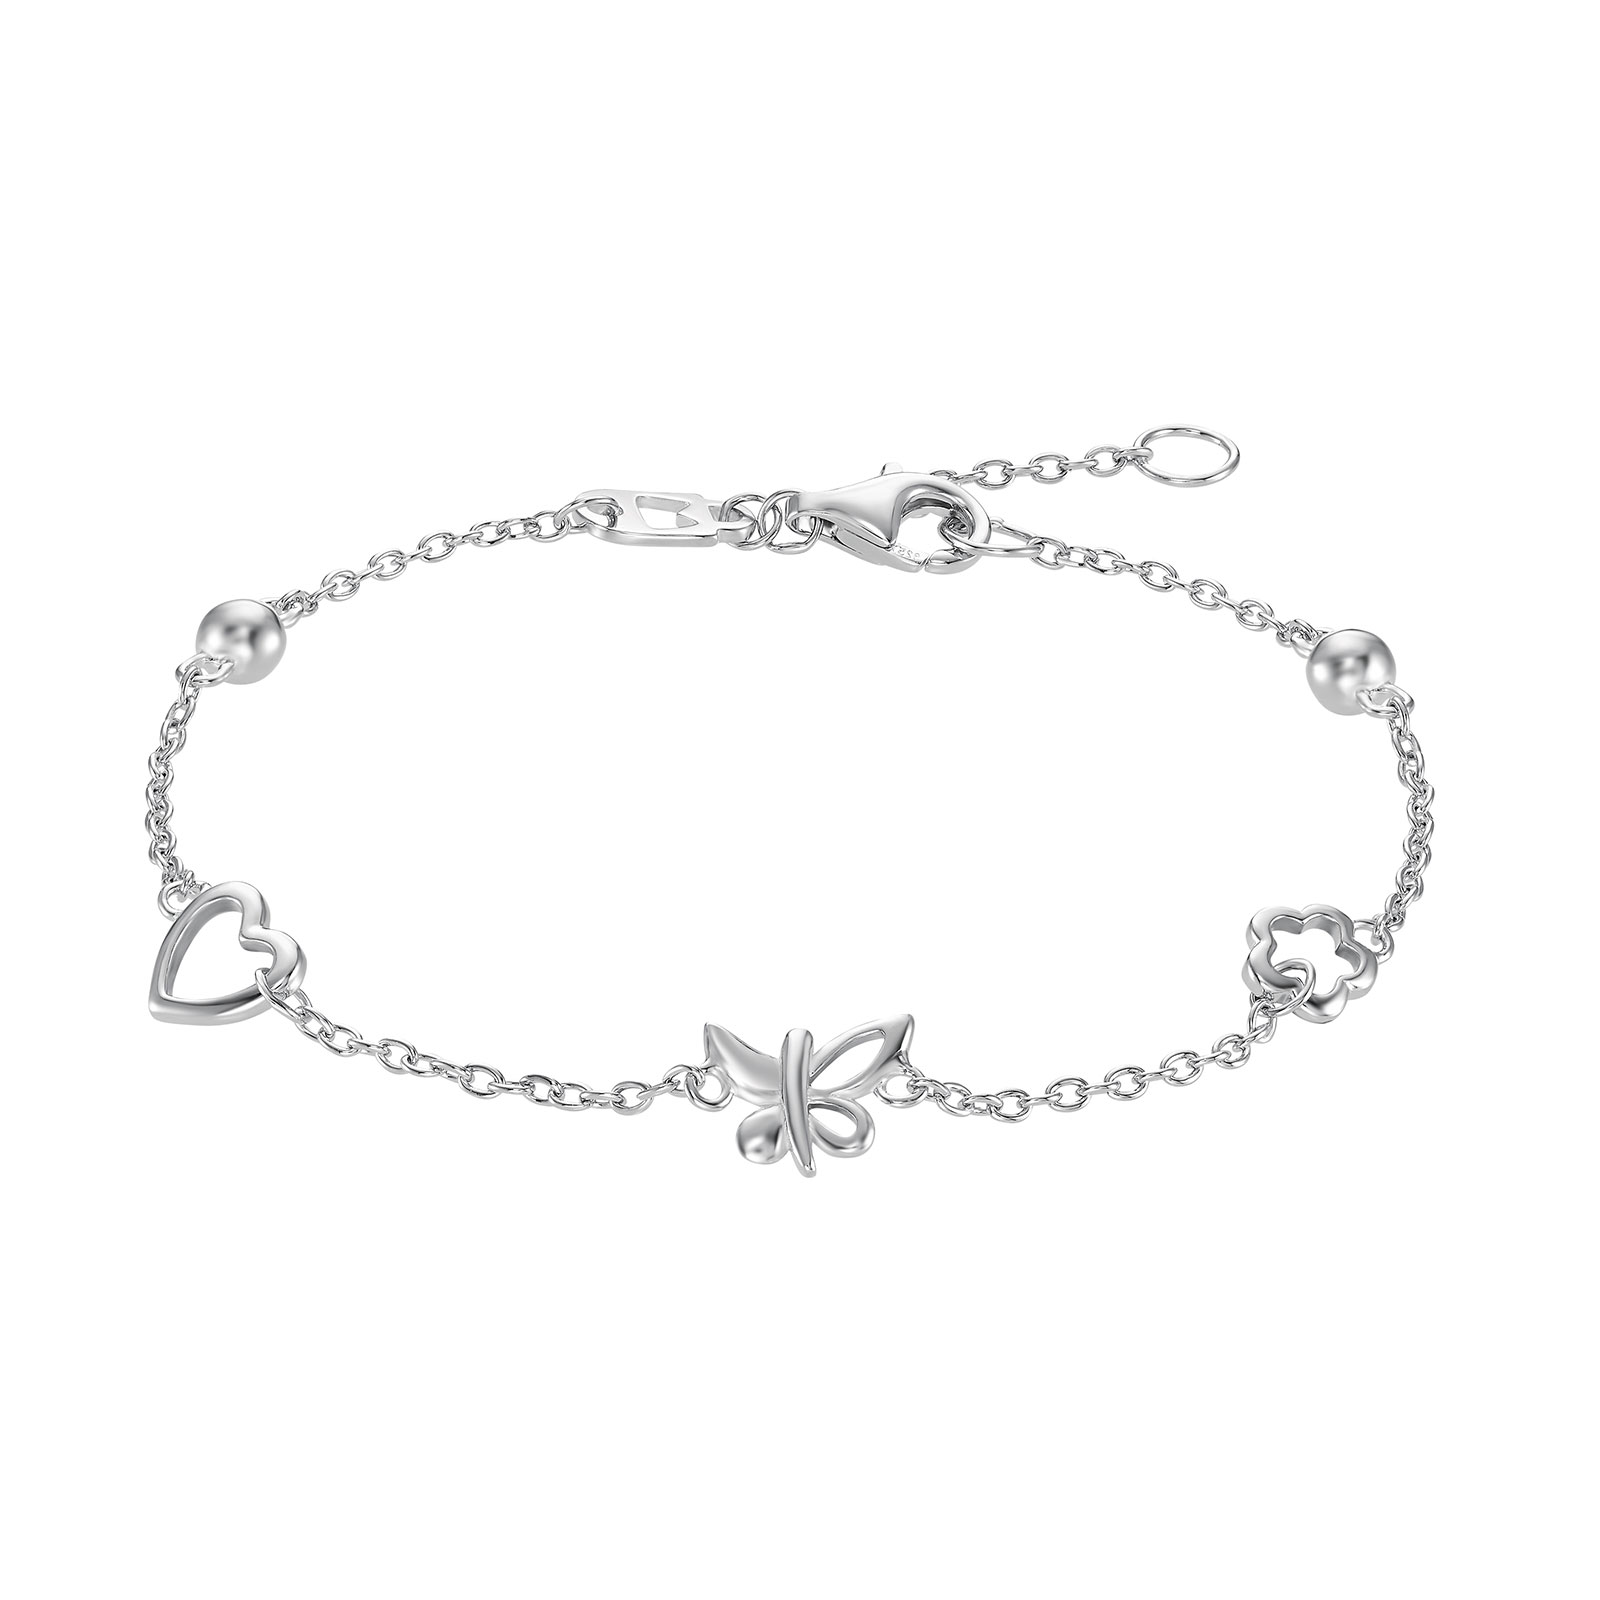 Armband Sterling Silver 925 - 17+2 cm